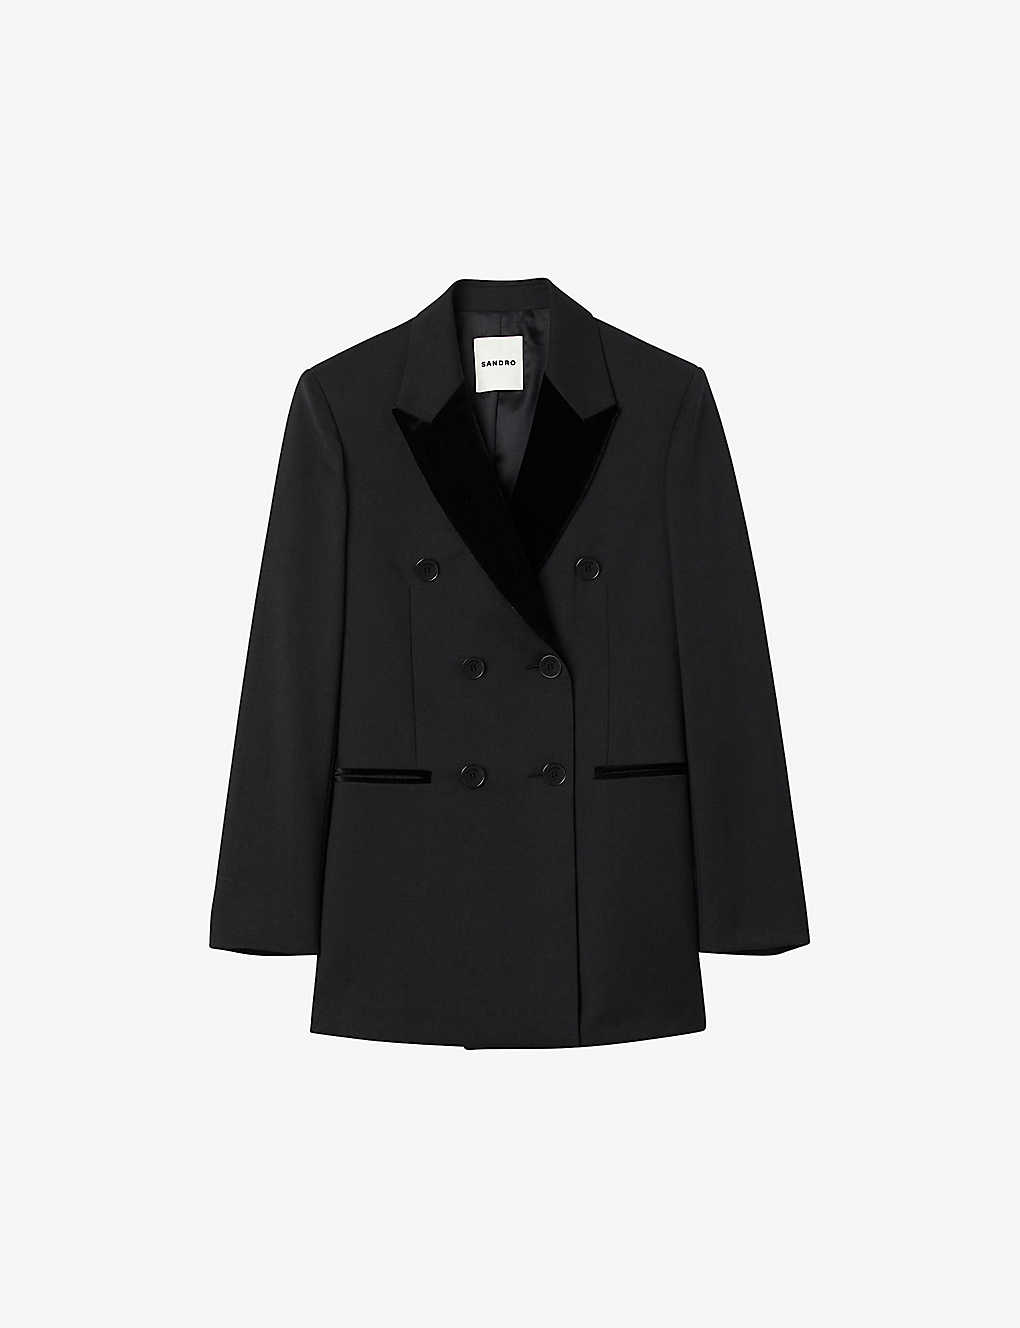 Sandro Womens Black Double-breasted Stretch-woven Blazer